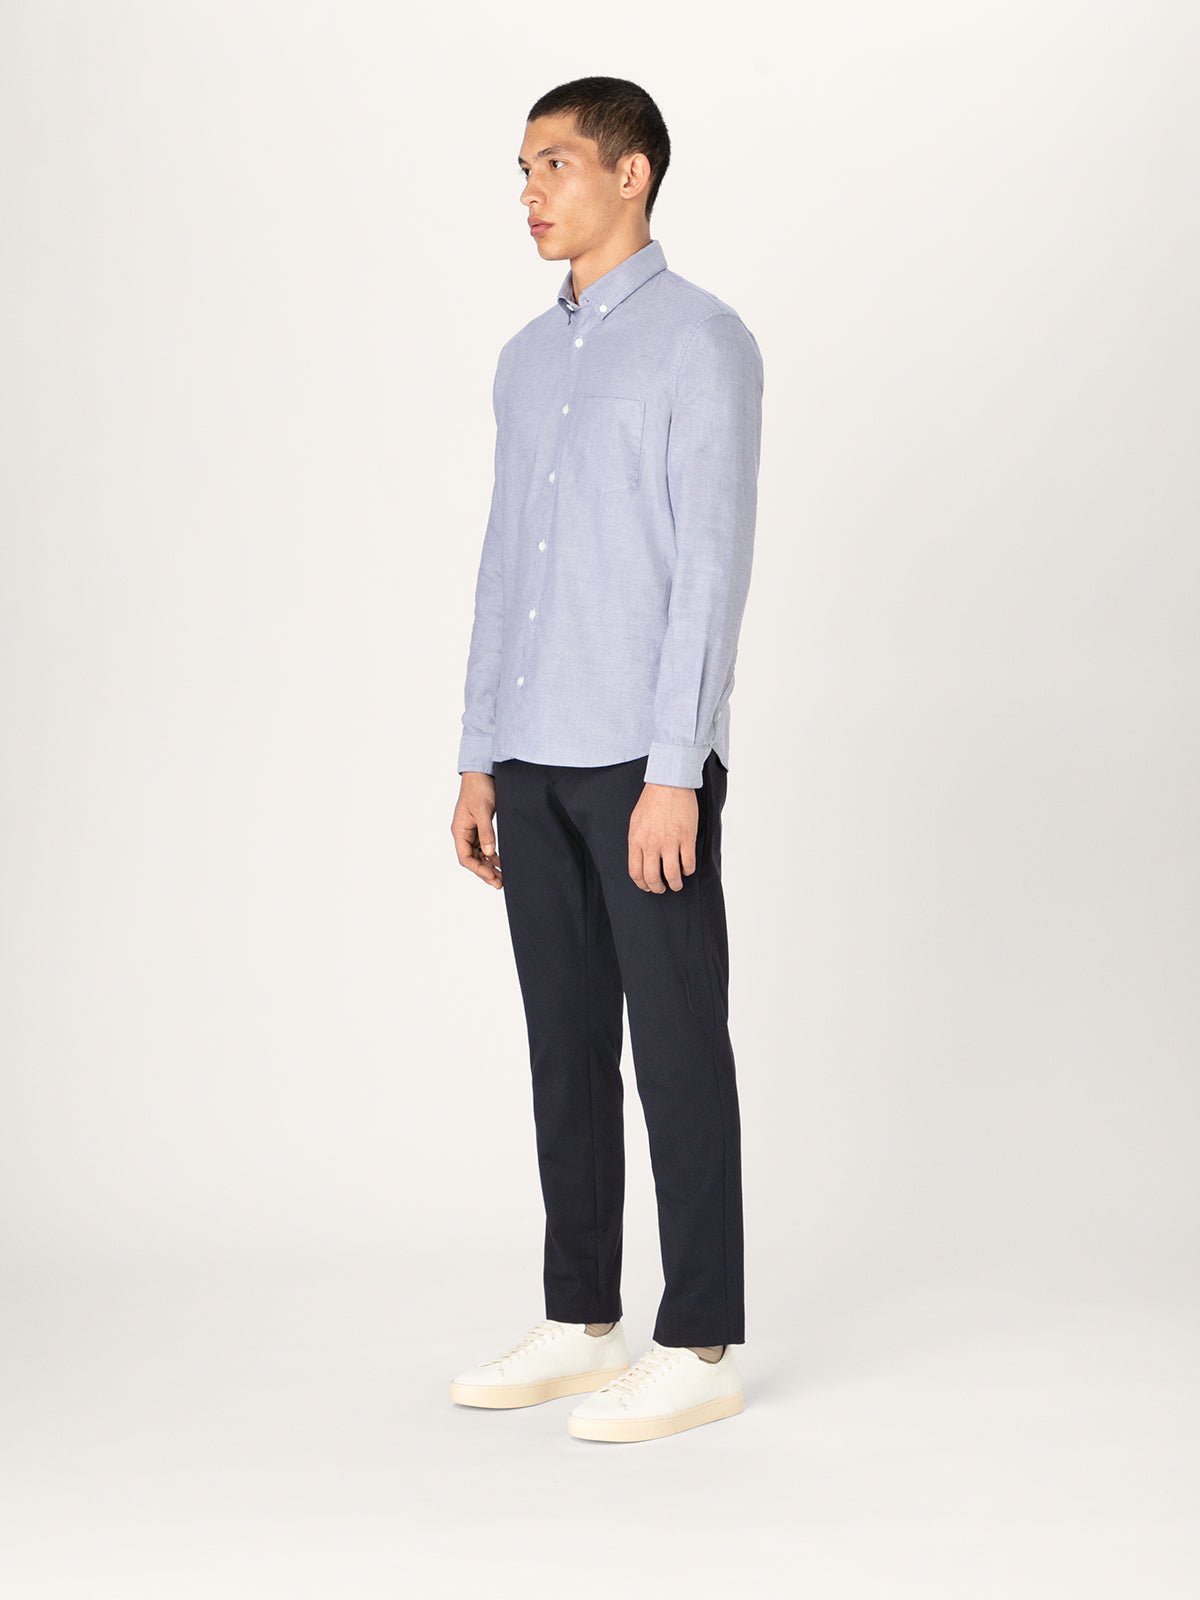 The All Day Oxford Shirt || Chambray | Stretch Cotton